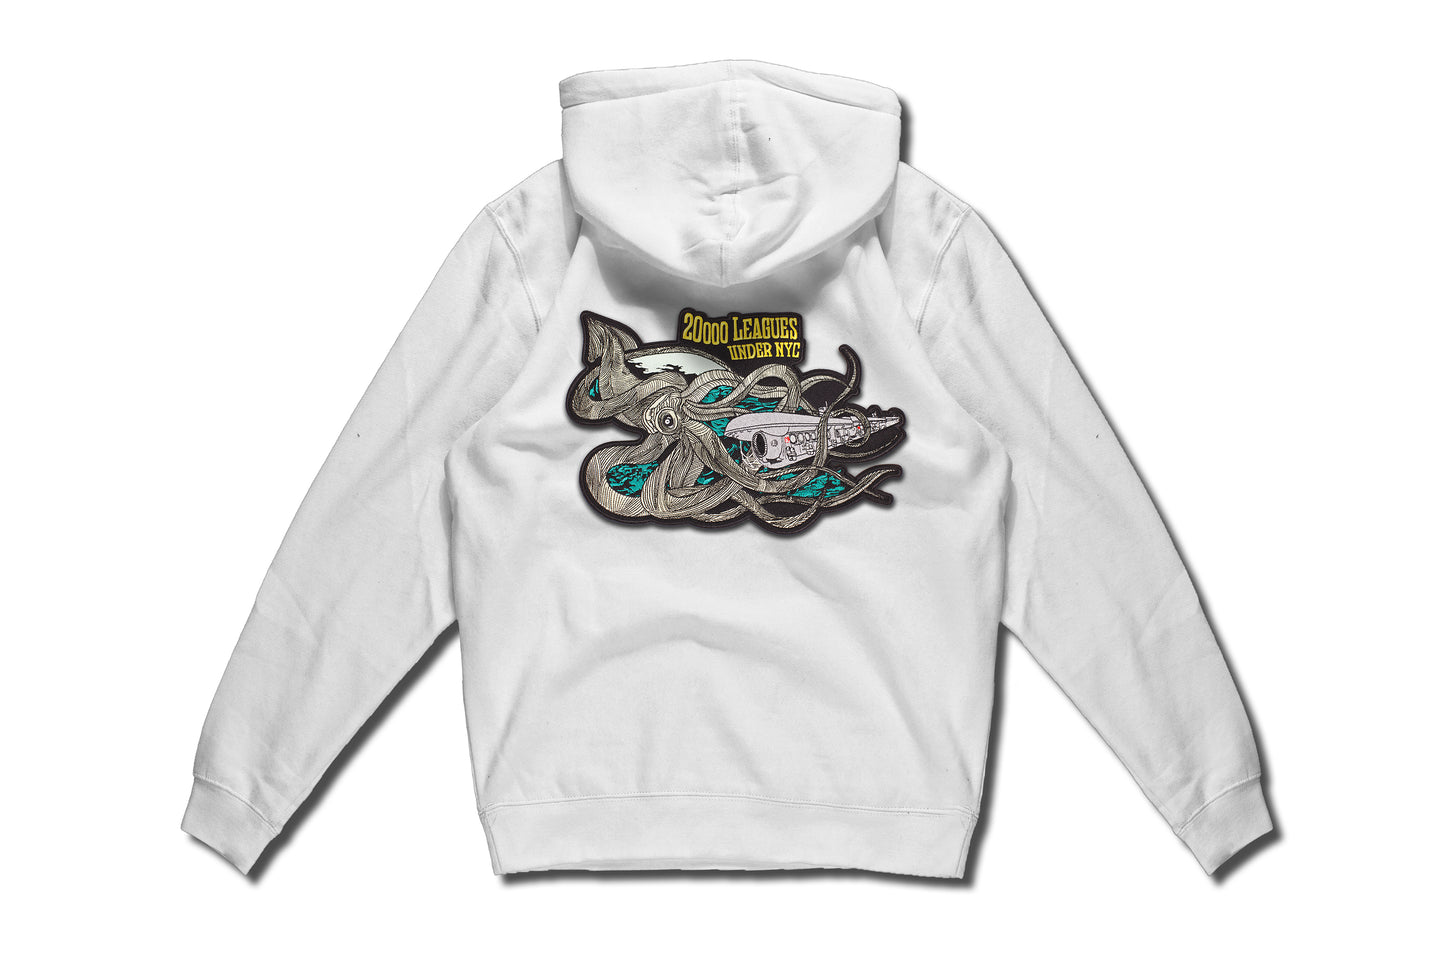 20,000 Leagues Under NYC Patch on White Hoodie